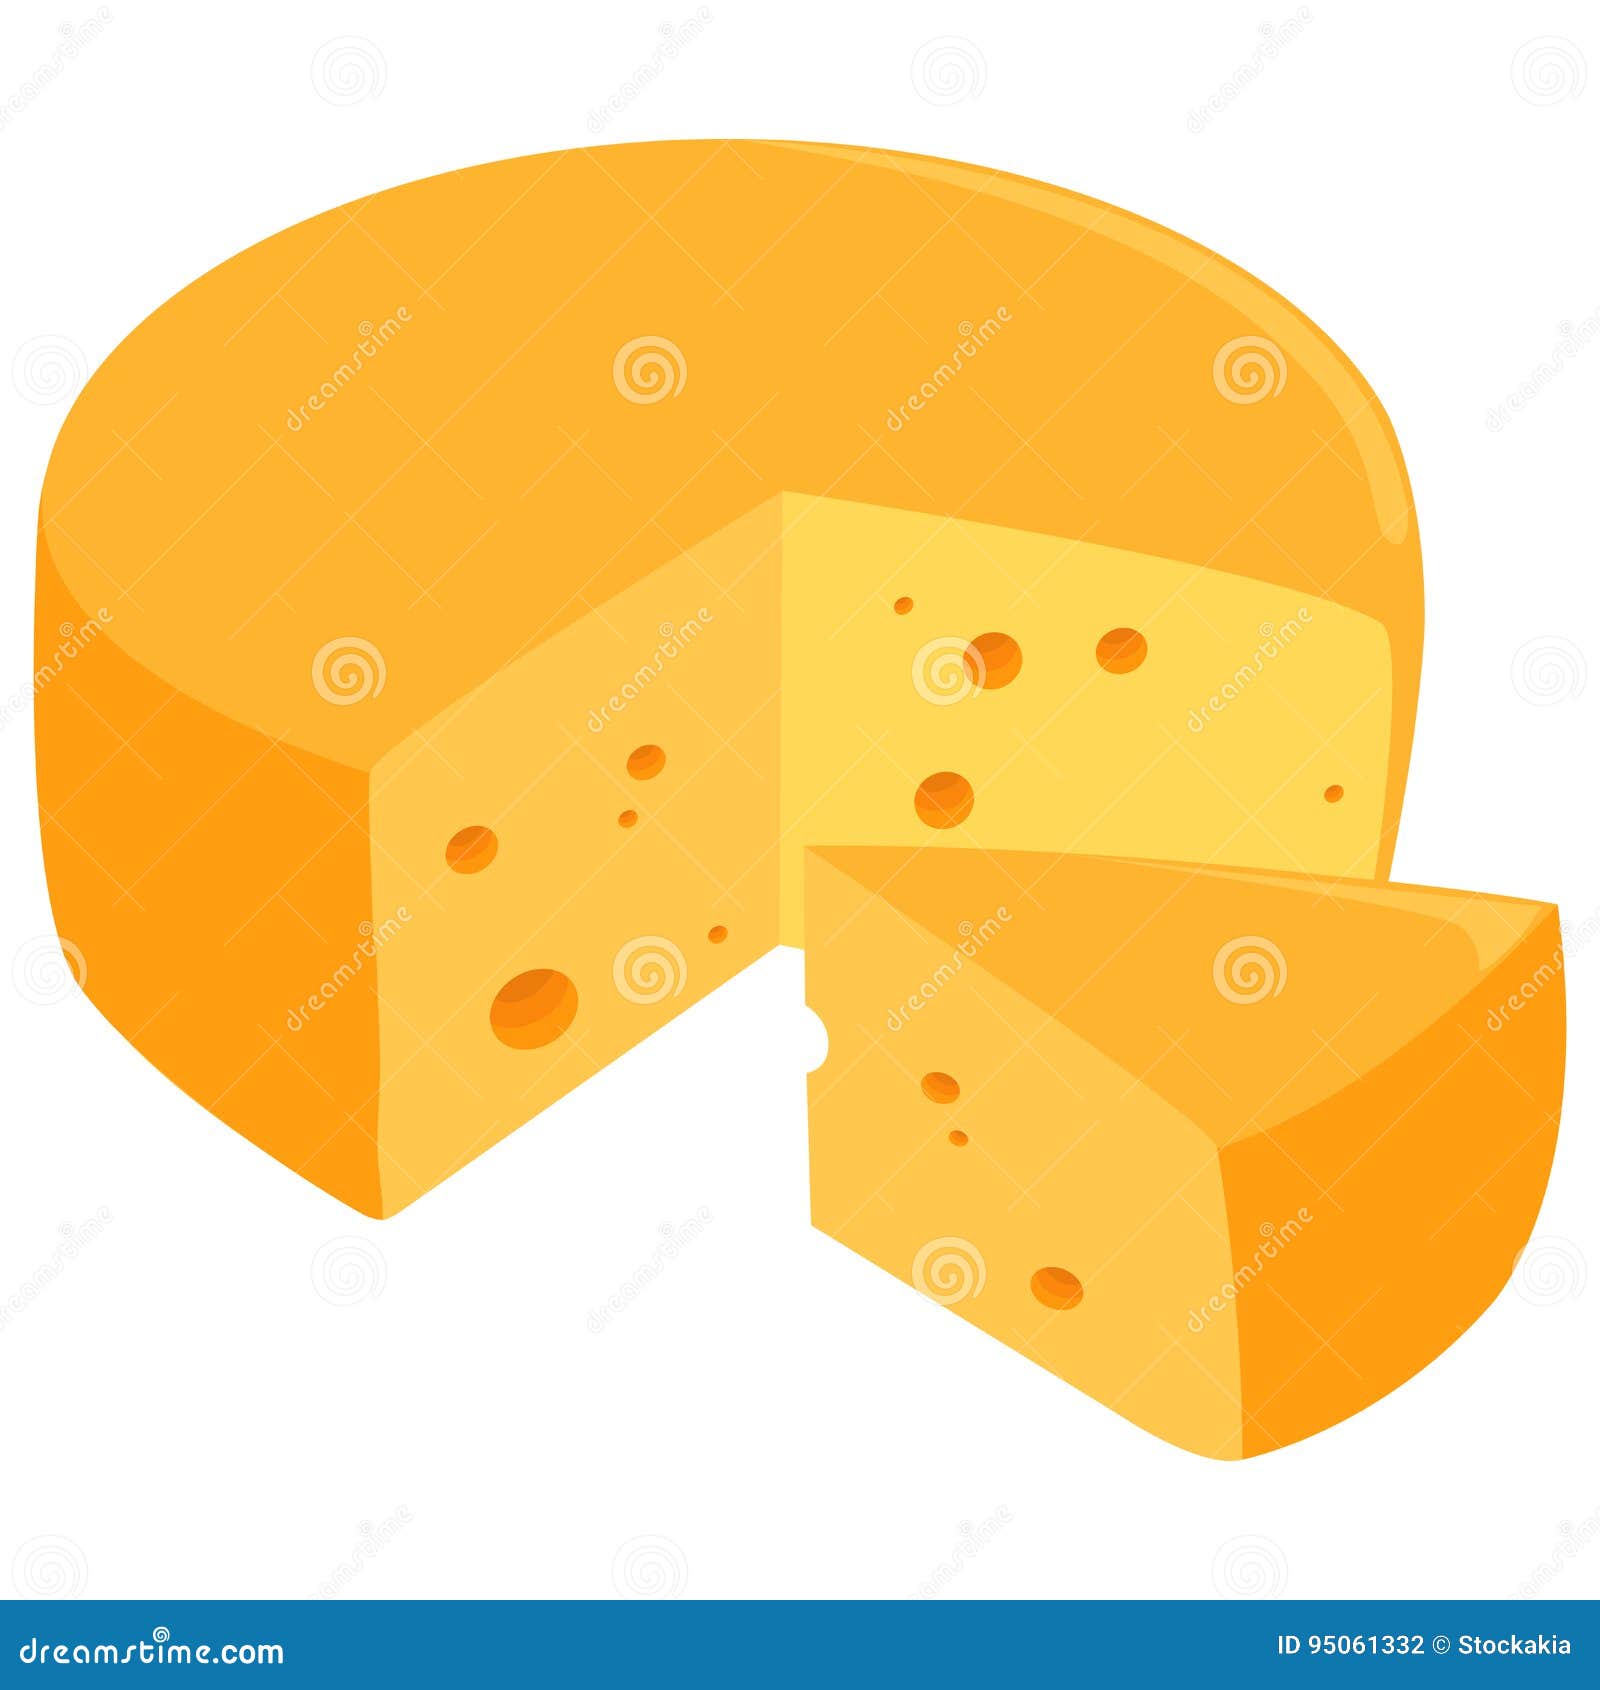 Download Cheese Wheel Stock Illustrations 1 069 Cheese Wheel Stock Illustrations Vectors Clipart Dreamstime Yellowimages Mockups